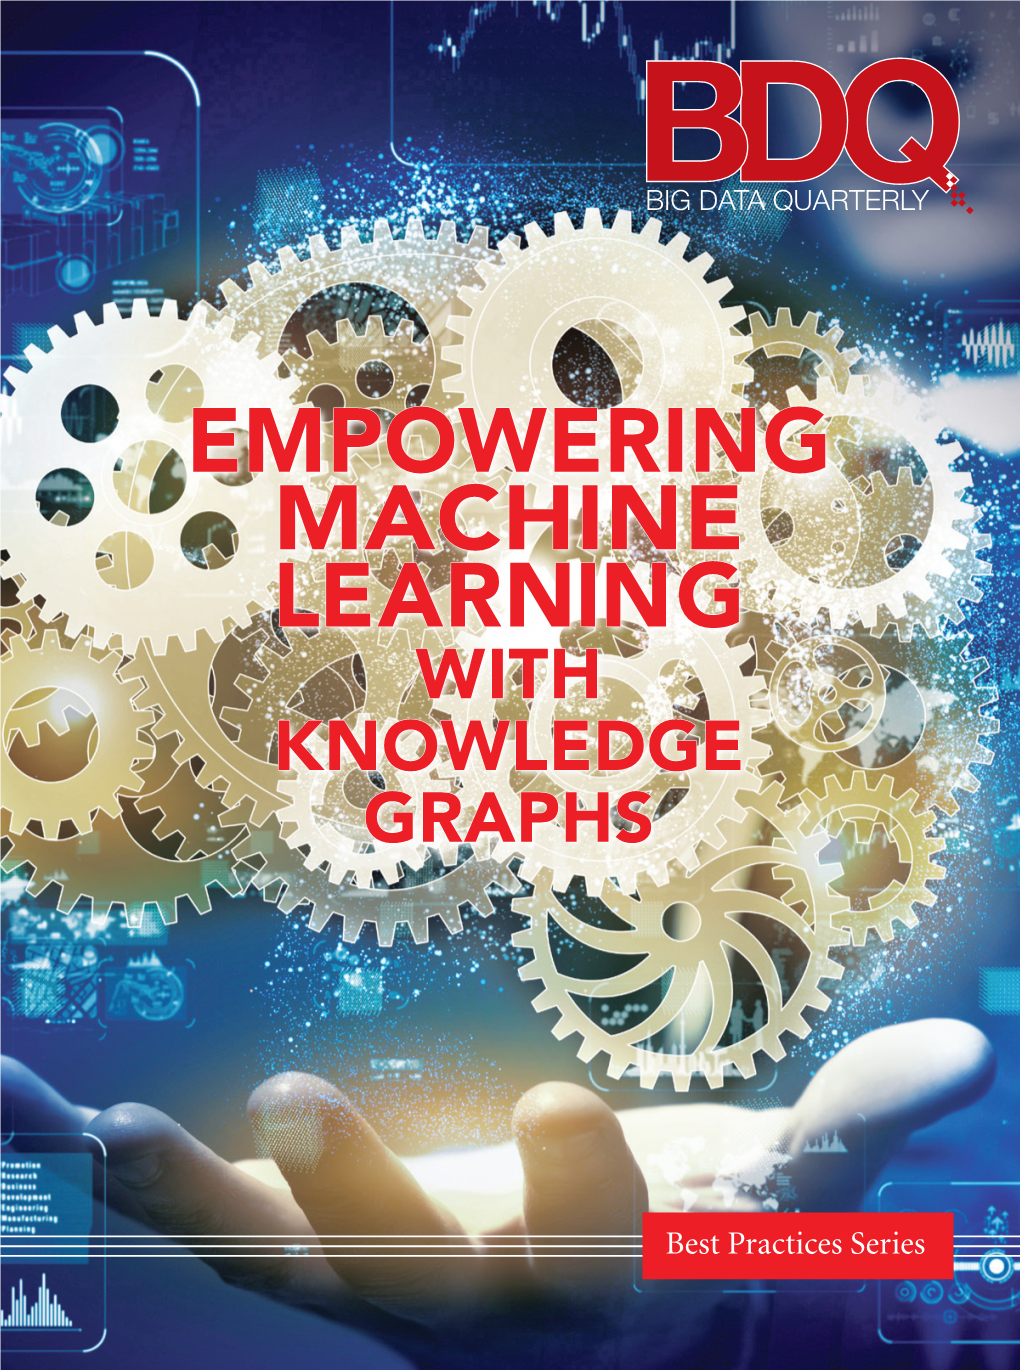 Improving Data Processes with Knowledge Graphs